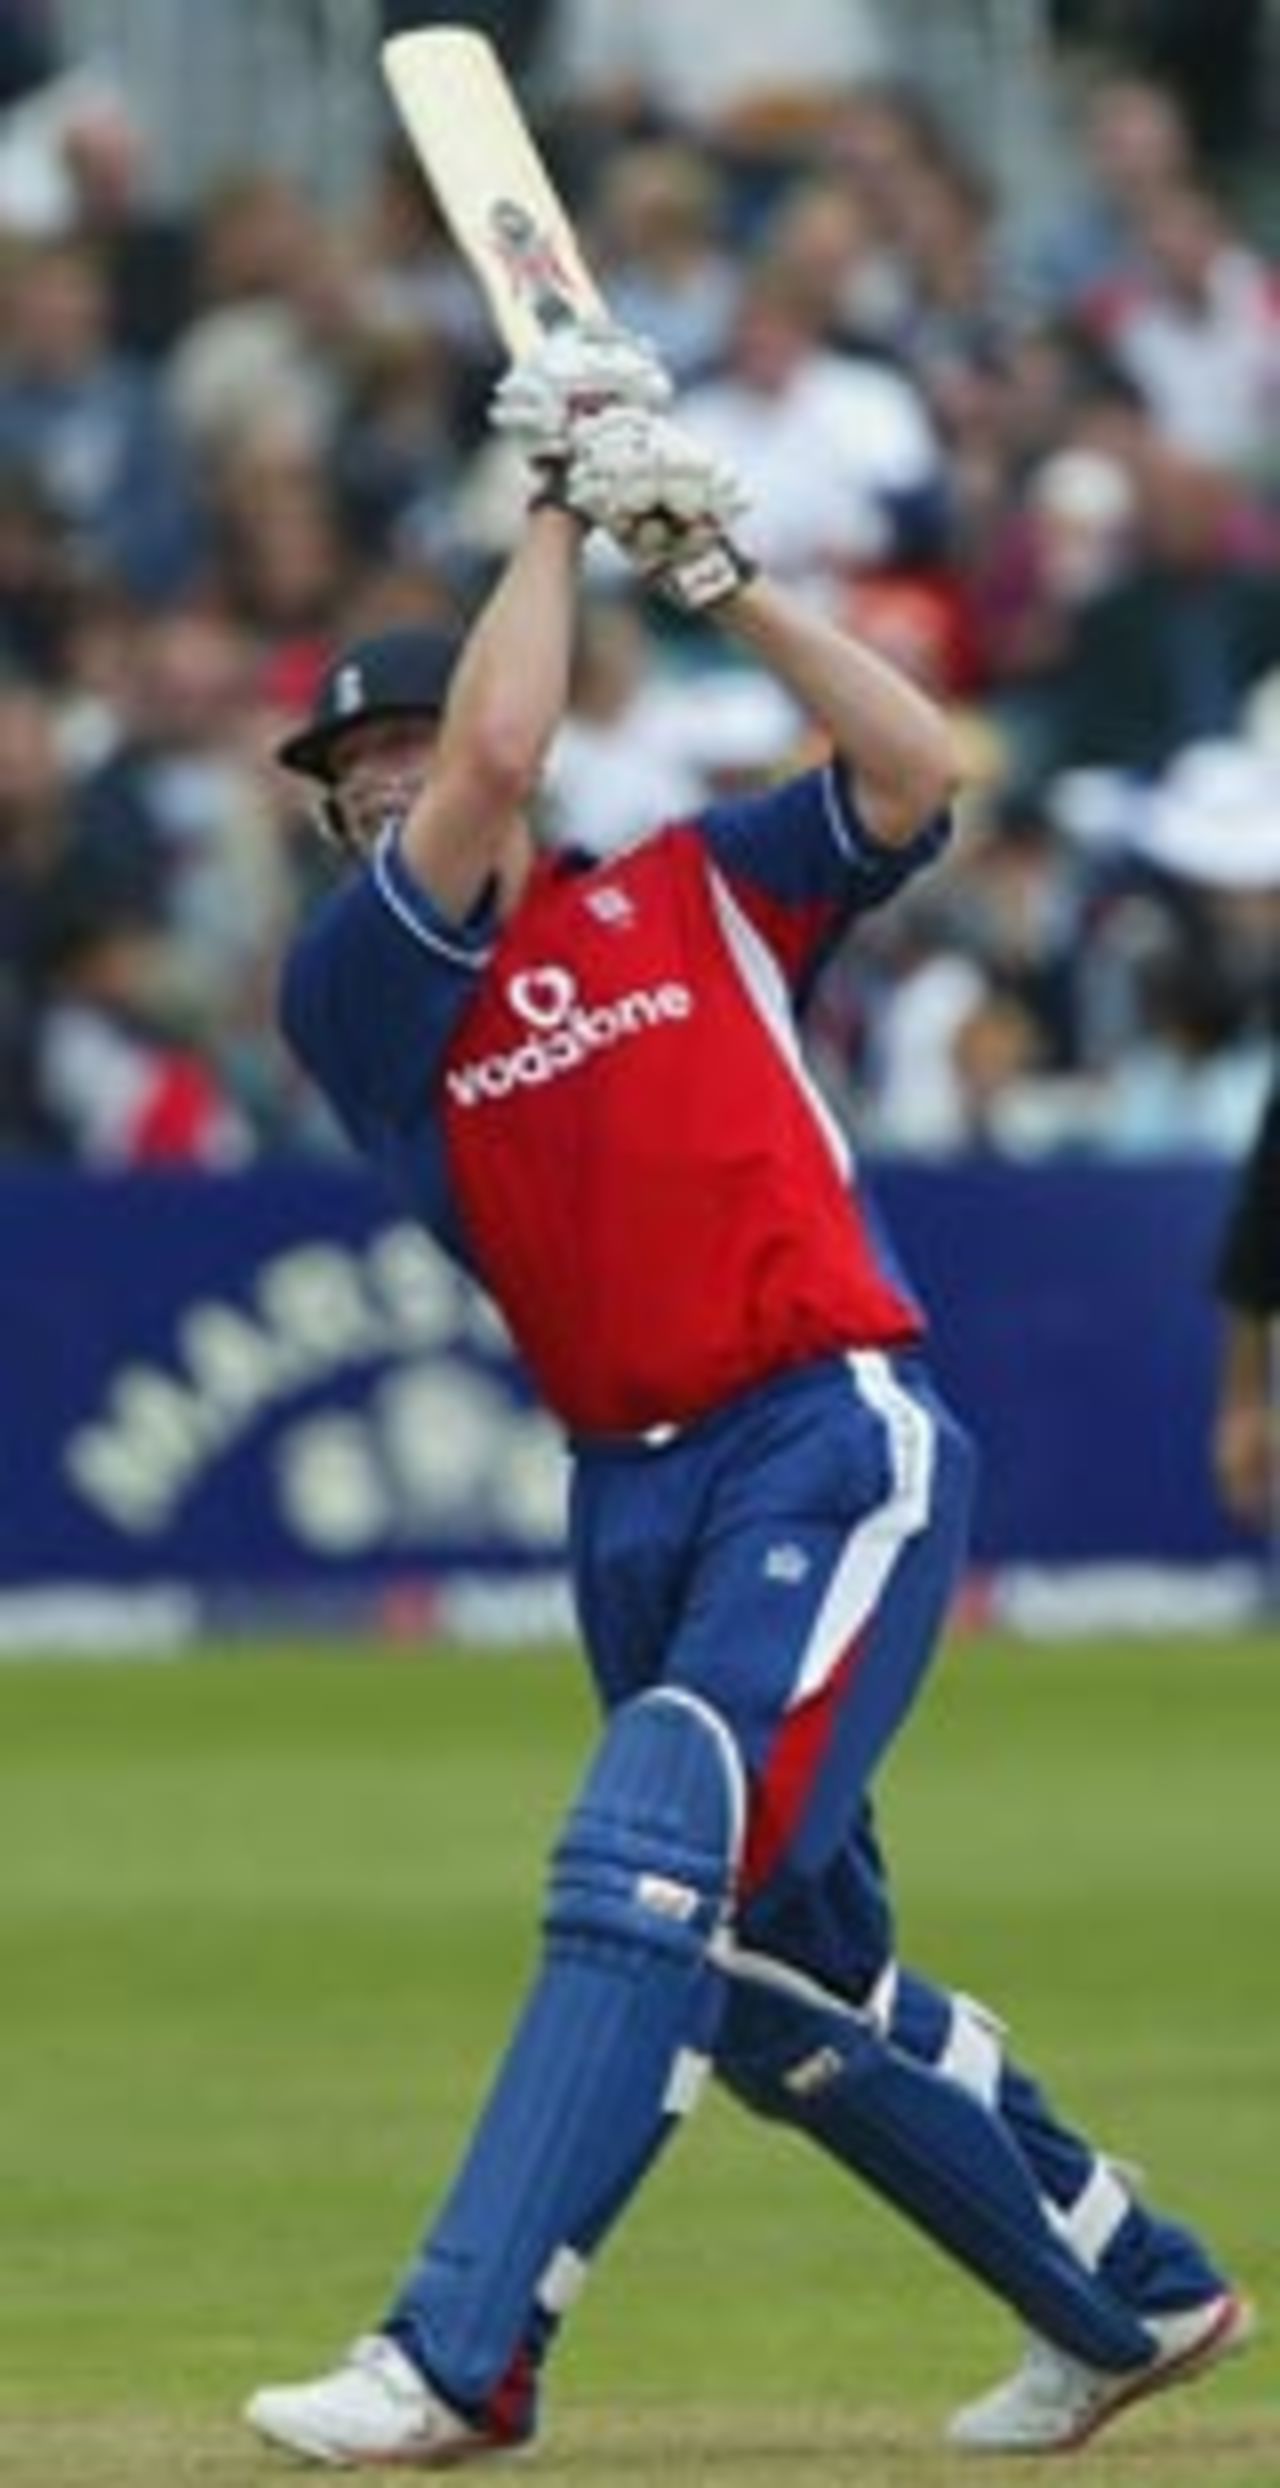 Andrew Flintoff hits out on his way to his first one-day century, England v New Zealand, NatWest Series, July 4 2004